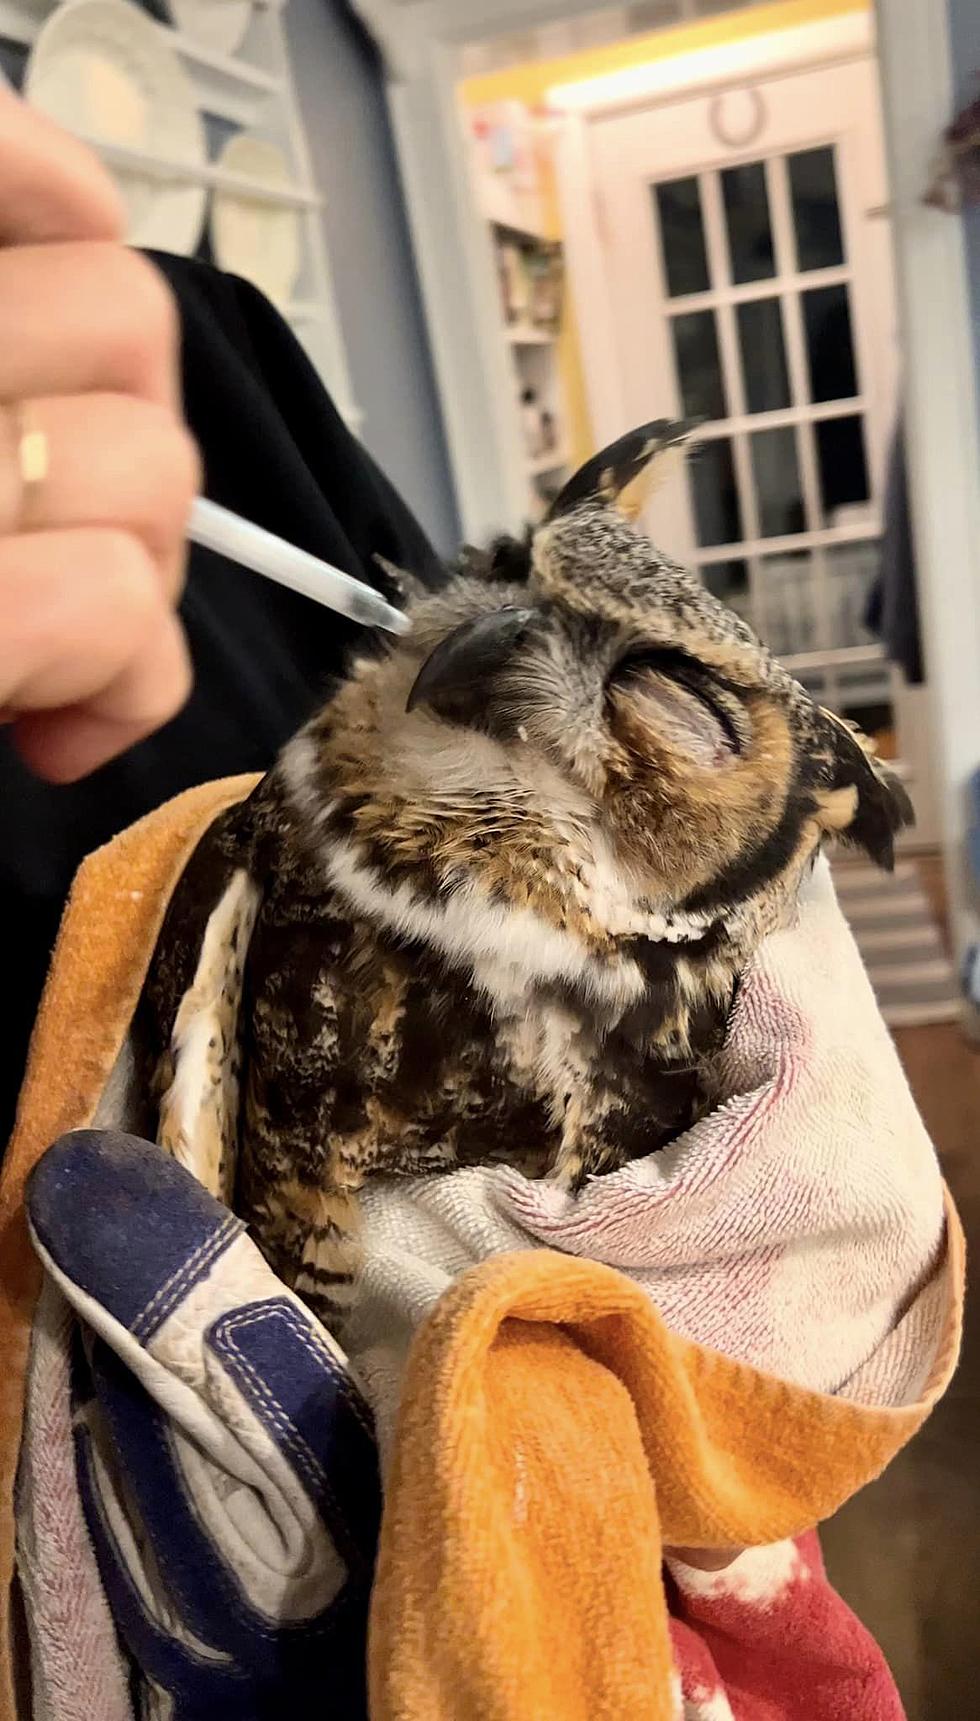 Rescuers in New York State Save Great Horned Owl [PICS]